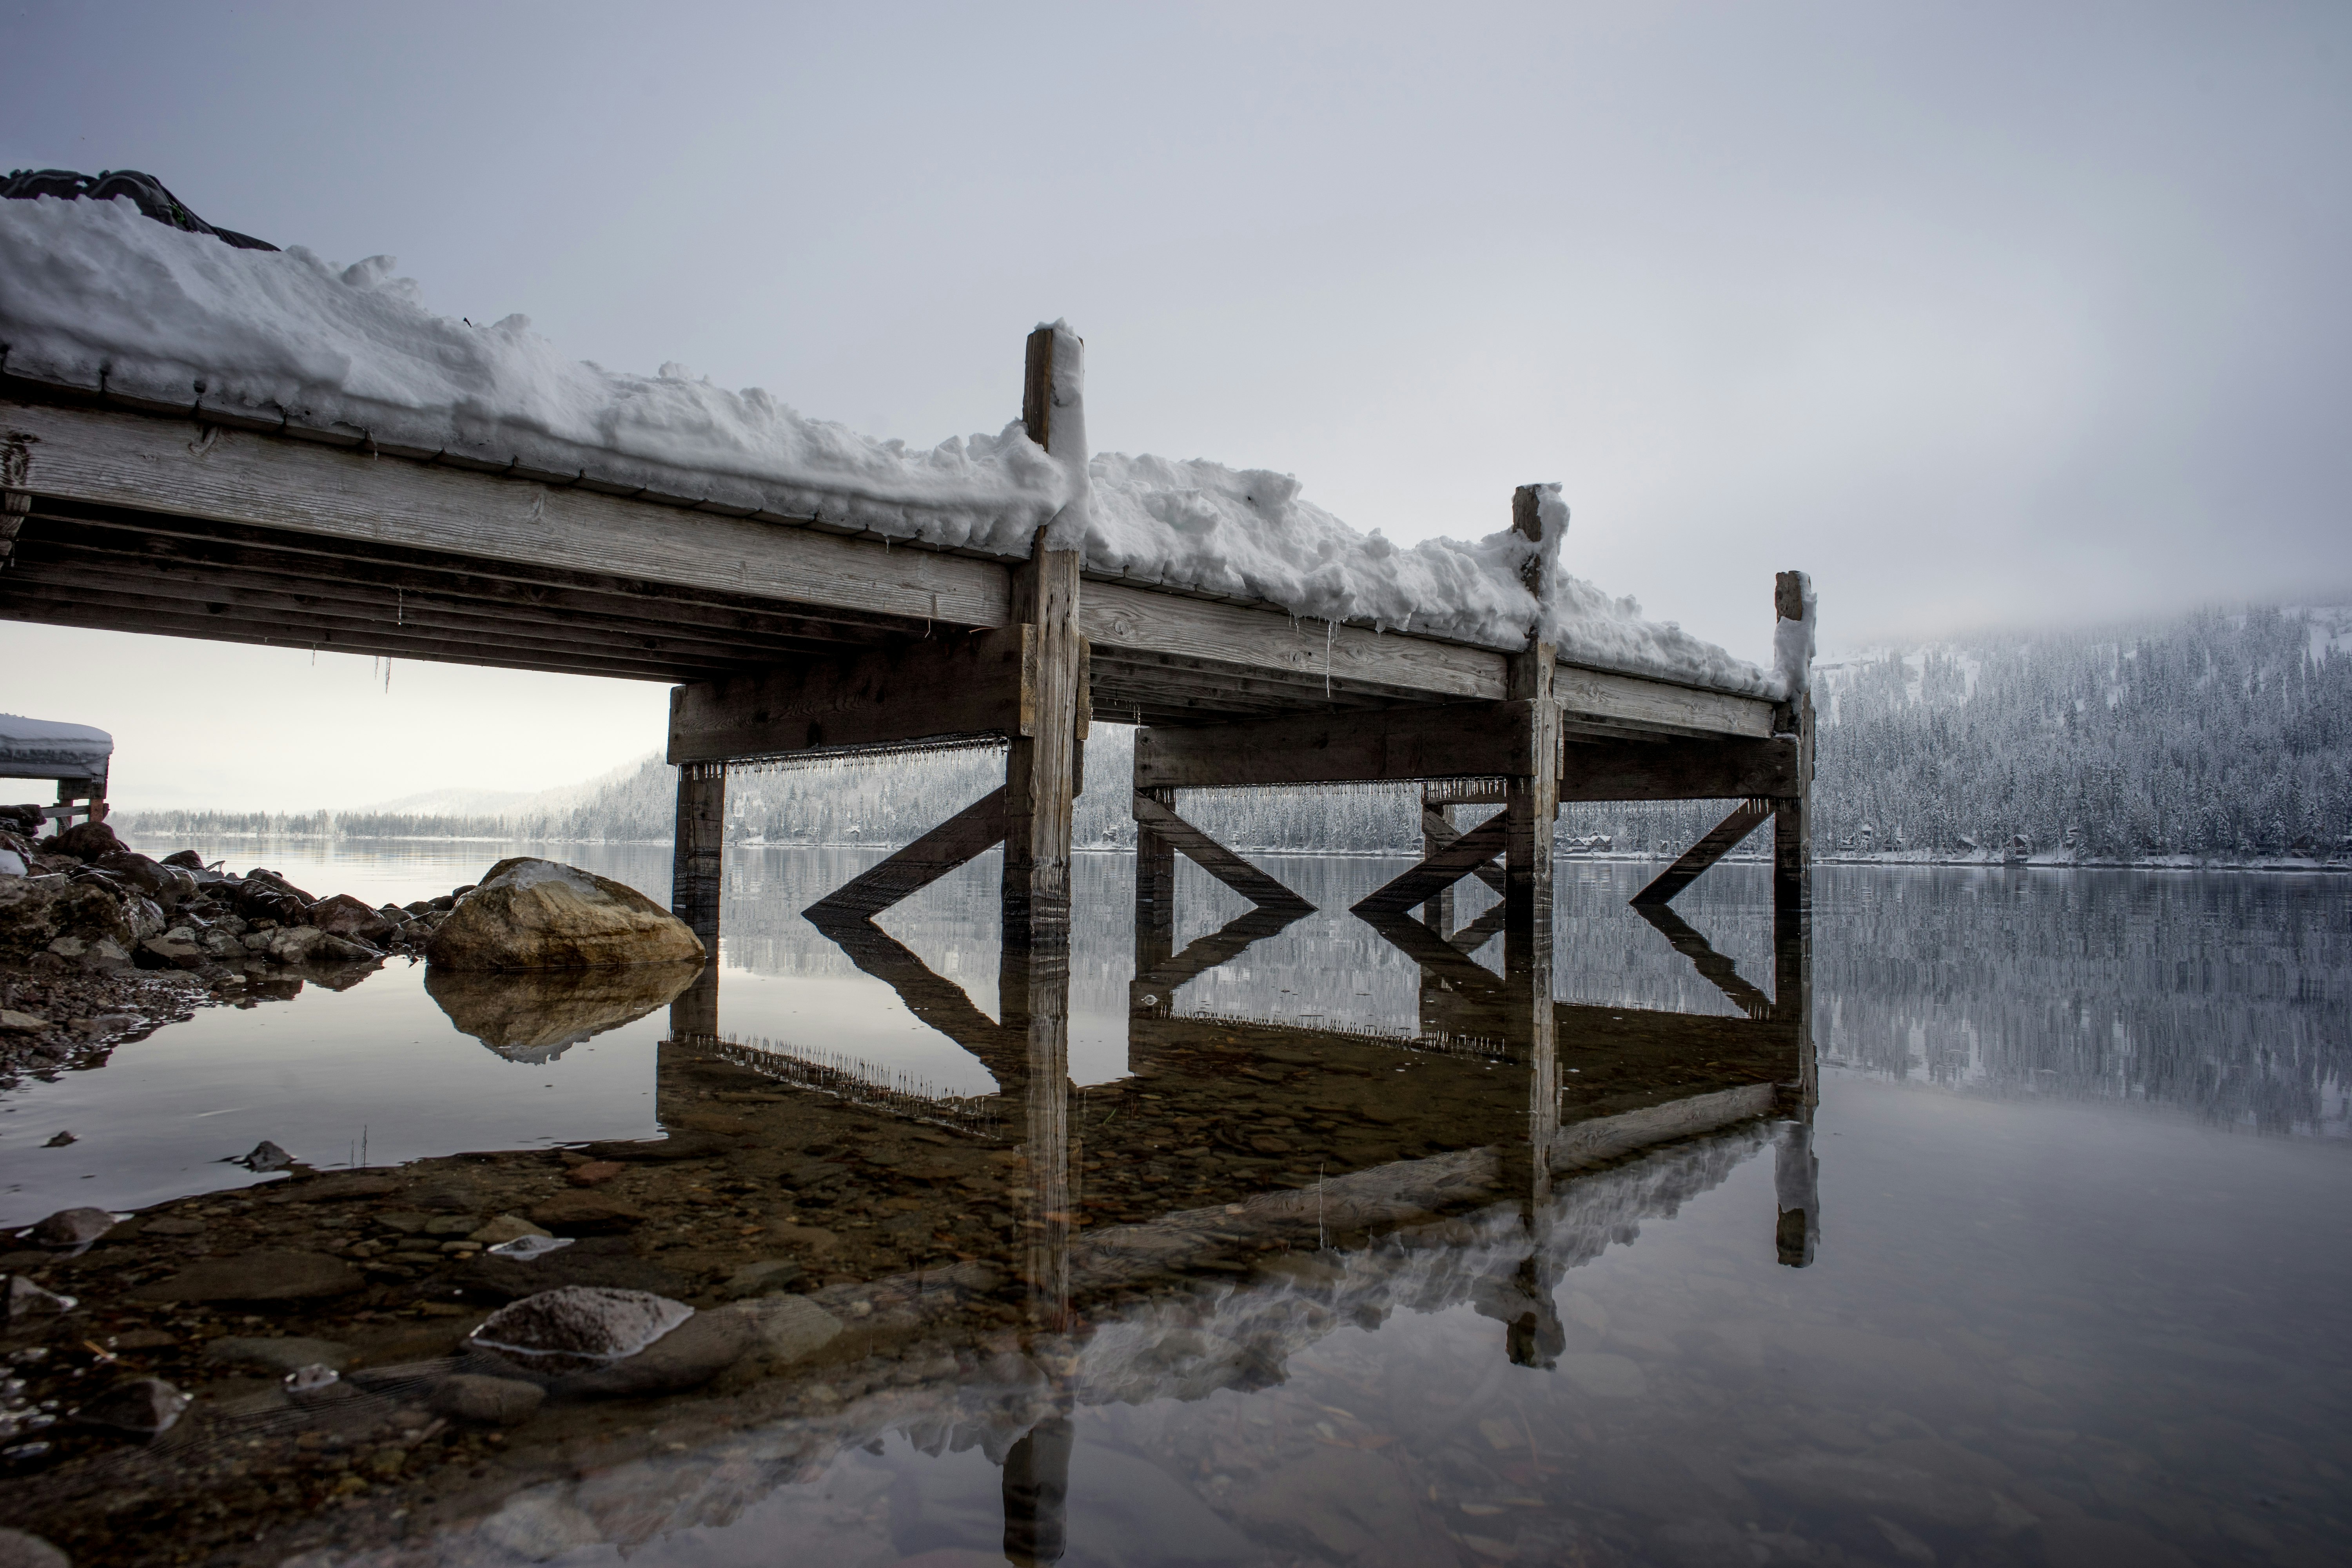 snow on brown wooden dock near body of water